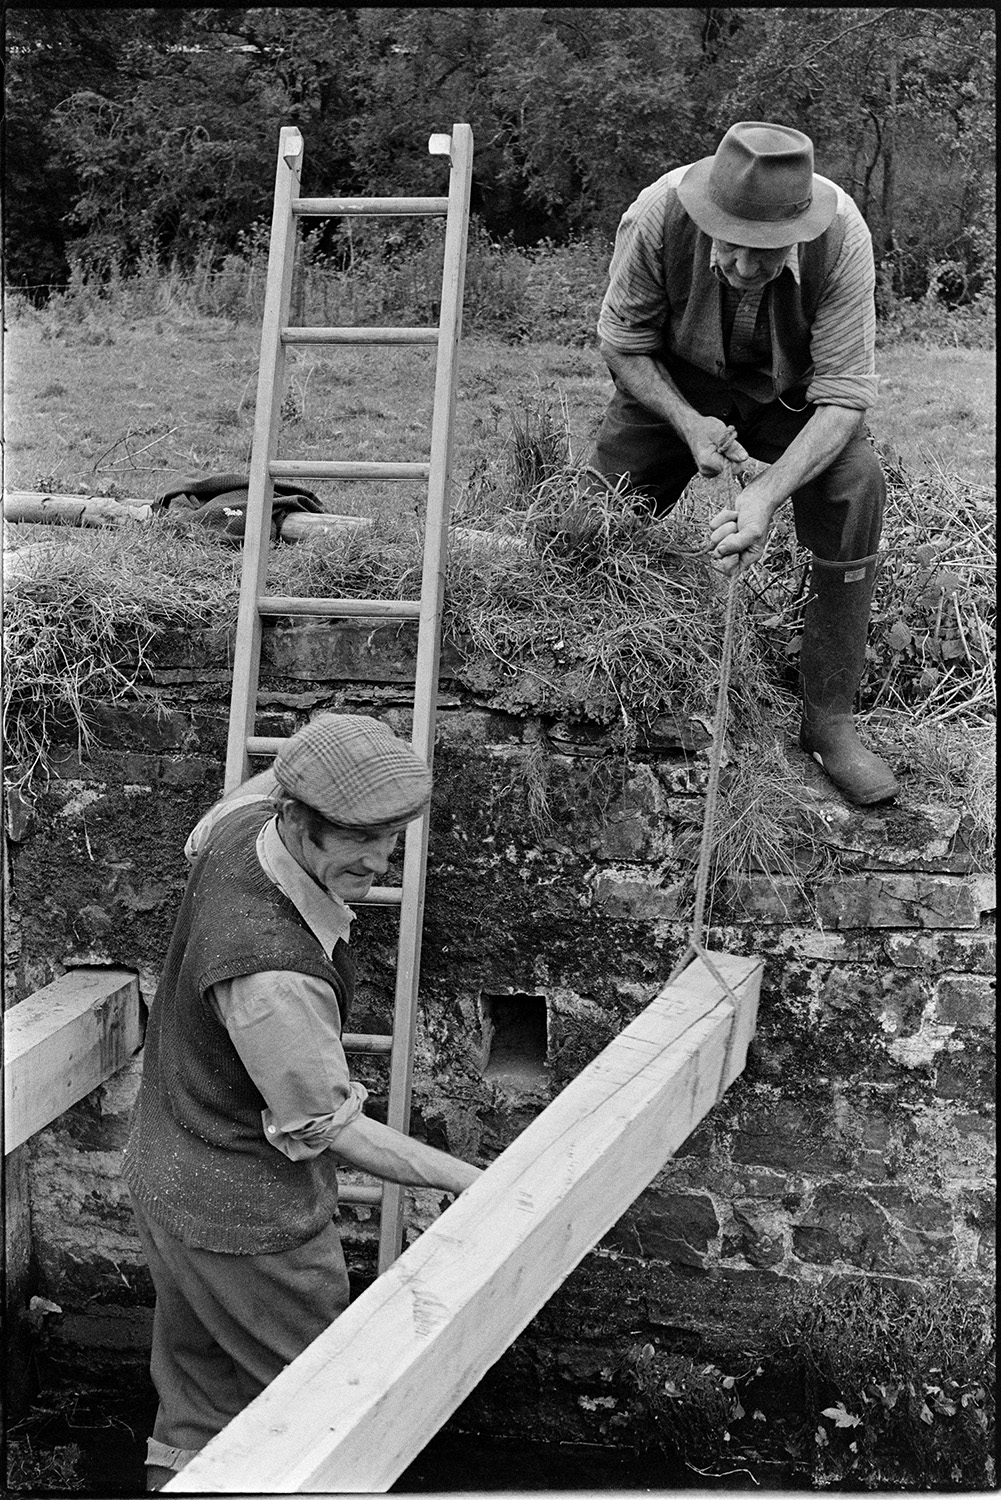 Men repairing wooden sluice gate. 
[Two men repairing a wooden sluice gates near Head Mill, Kings Nympton. One of the men is on a ladder in the sluice and they are lowering a wooden beam into the sluice.]